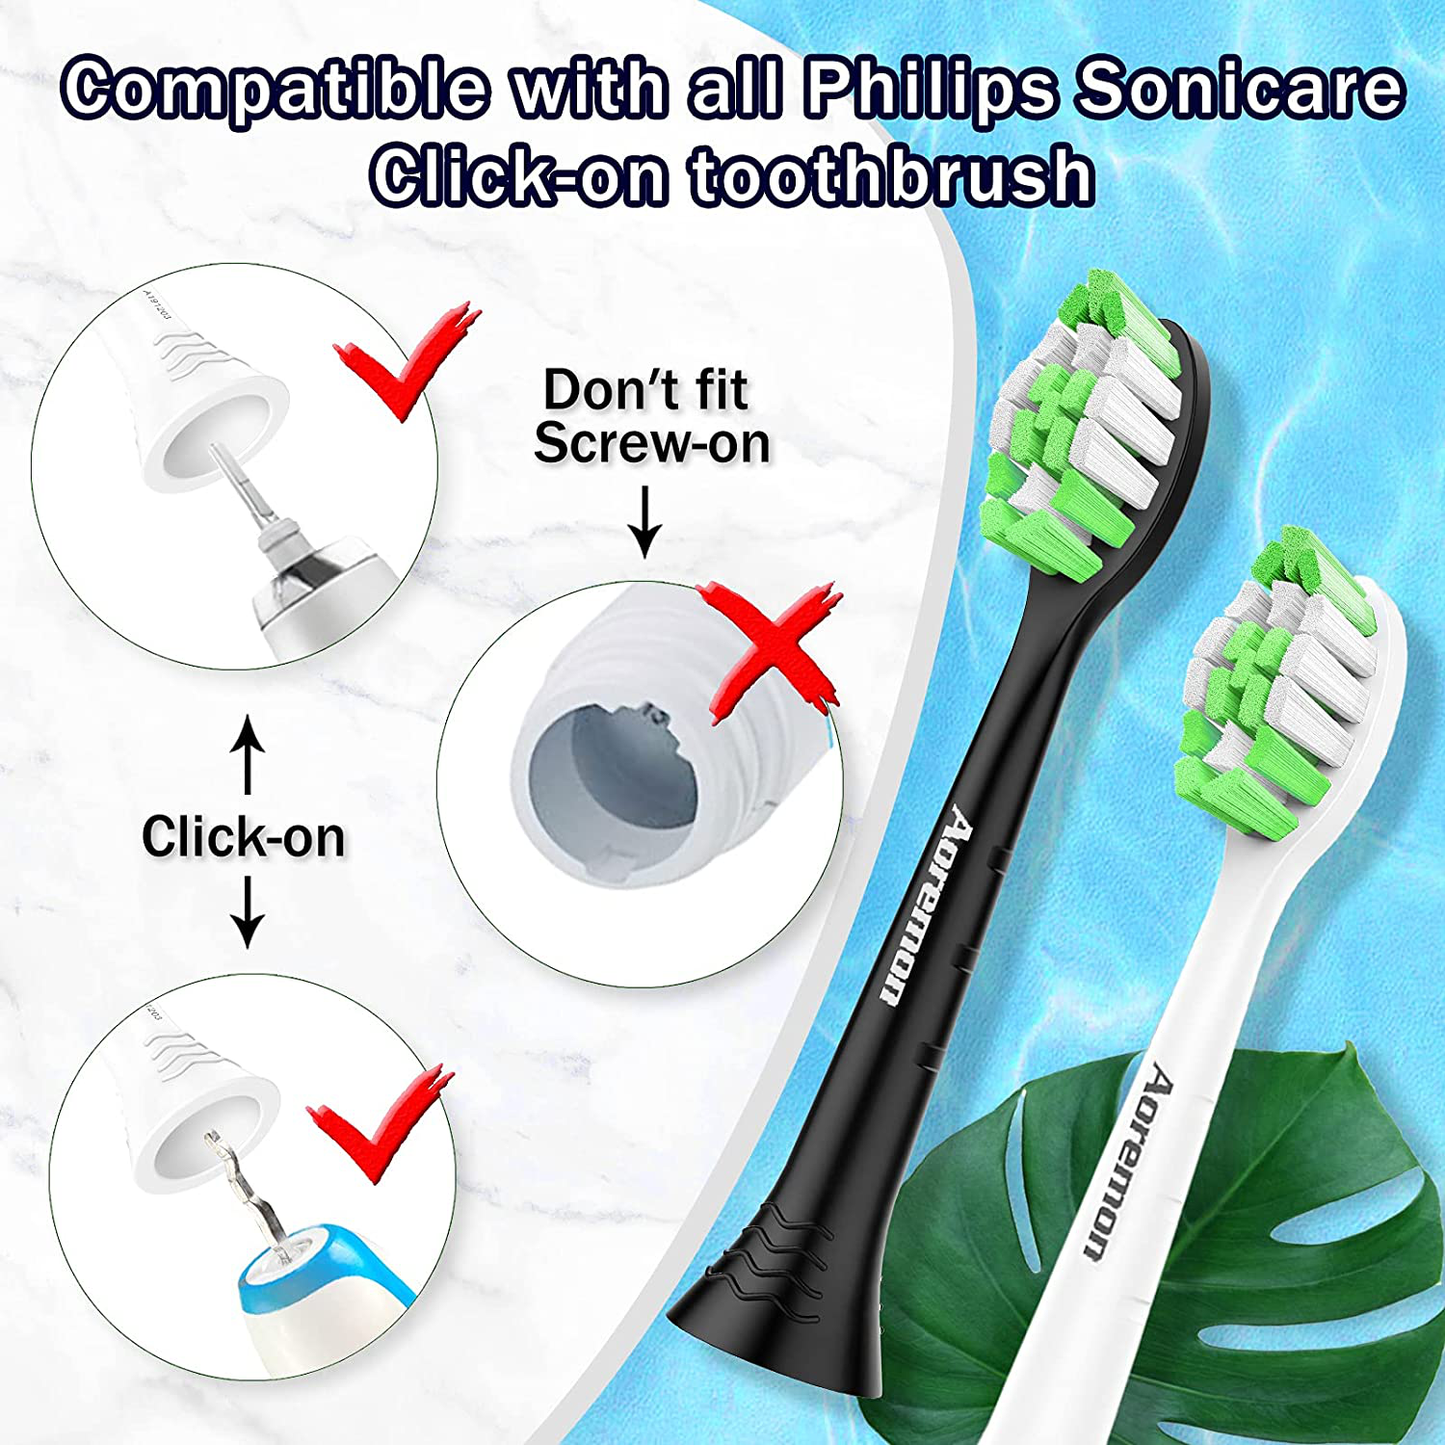 Aoremon Toothbrush Replacement Heads for Philips Sonicare Diamondclean HX6064/65 HX6062/95 and Other Snap-on Sonicare Electric Toothbrush, 12 Pack